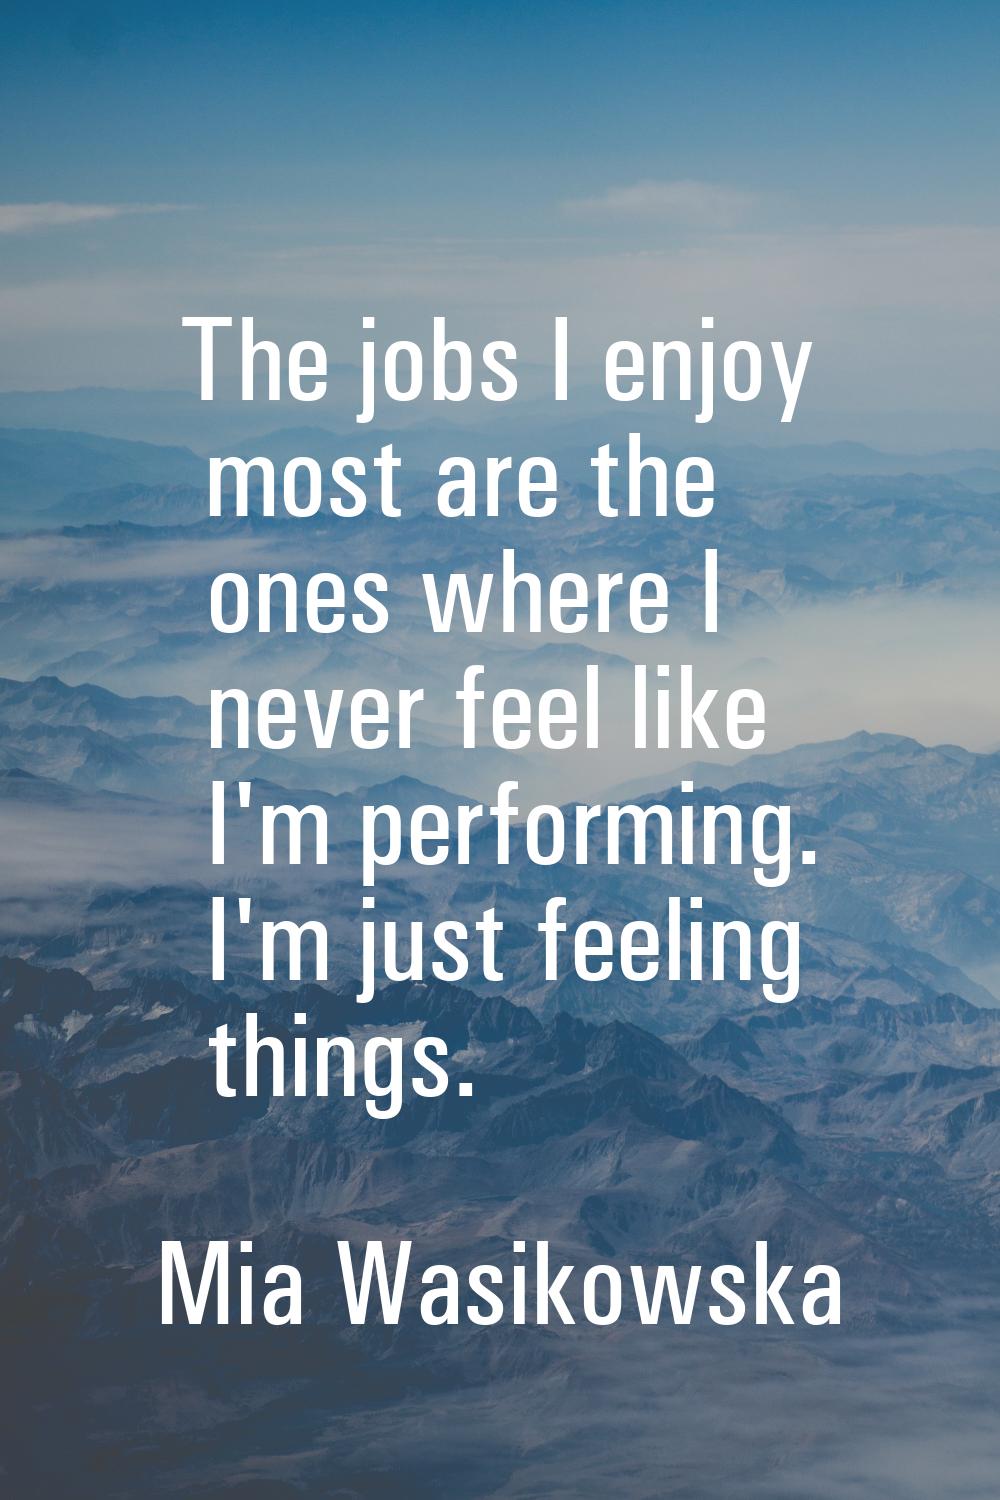 The jobs I enjoy most are the ones where I never feel like I'm performing. I'm just feeling things.